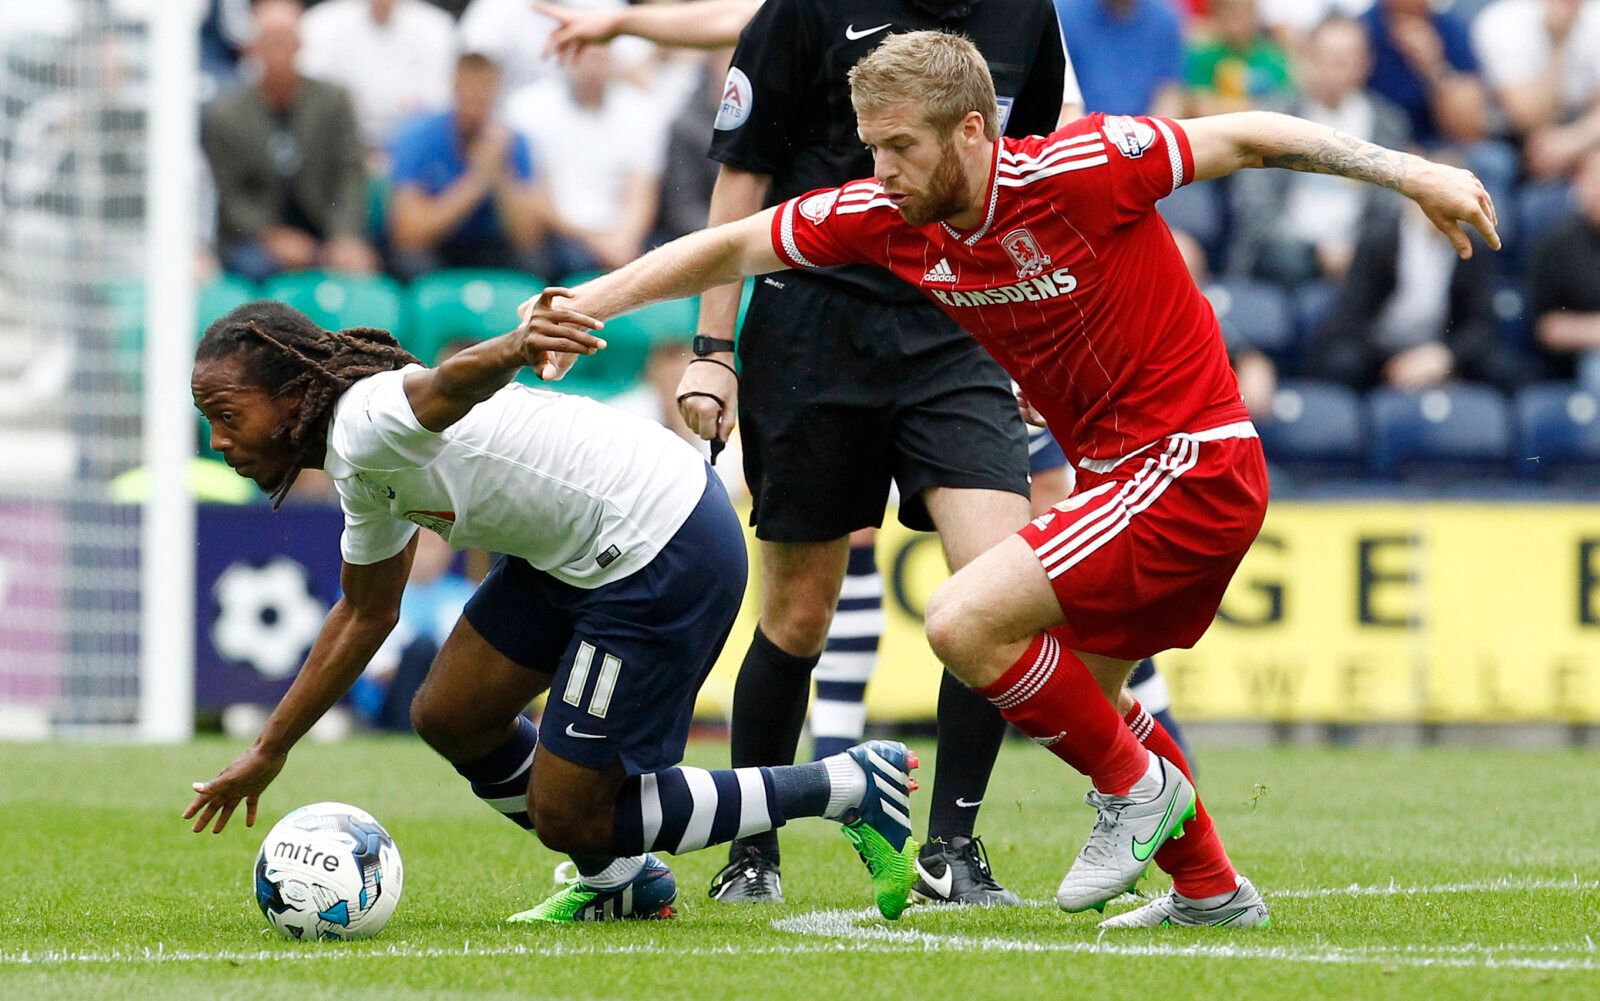 Football - Preston North End v Middlesbrough - Sky Bet Football League Championship - Deepdale - 9/8/15 
Preston North End's Daniel Johnson (L) in action with Middlesbrough's Adam Clayton 
Mandatory Credit: Action Images / Craig Brough 
Livepic 
EDITORIAL USE ONLY. No use with unauthorized audio, video, data, fixture lists, club/league logos or 